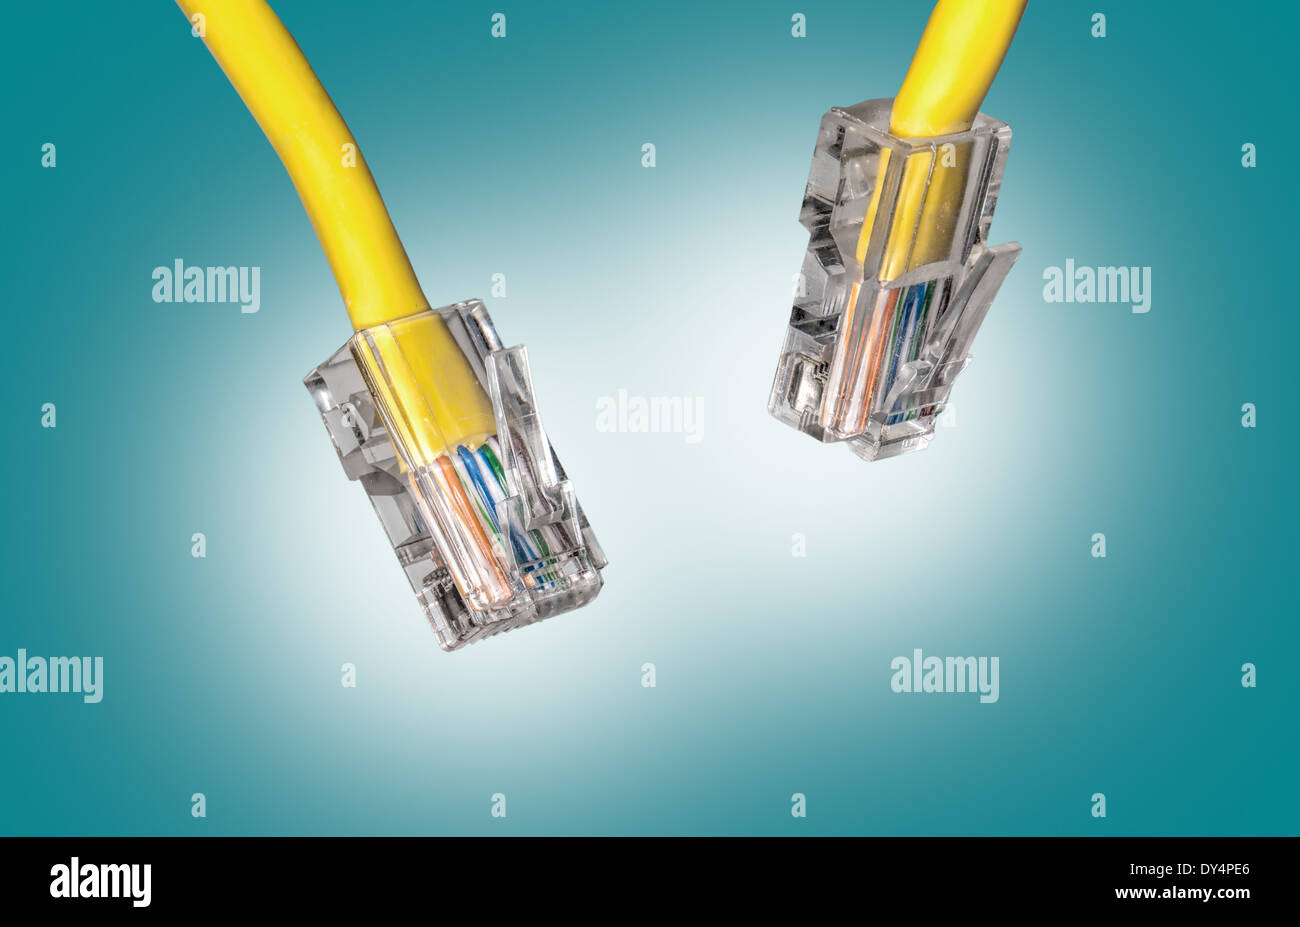 close upshot of lan cable networking Stock Photo